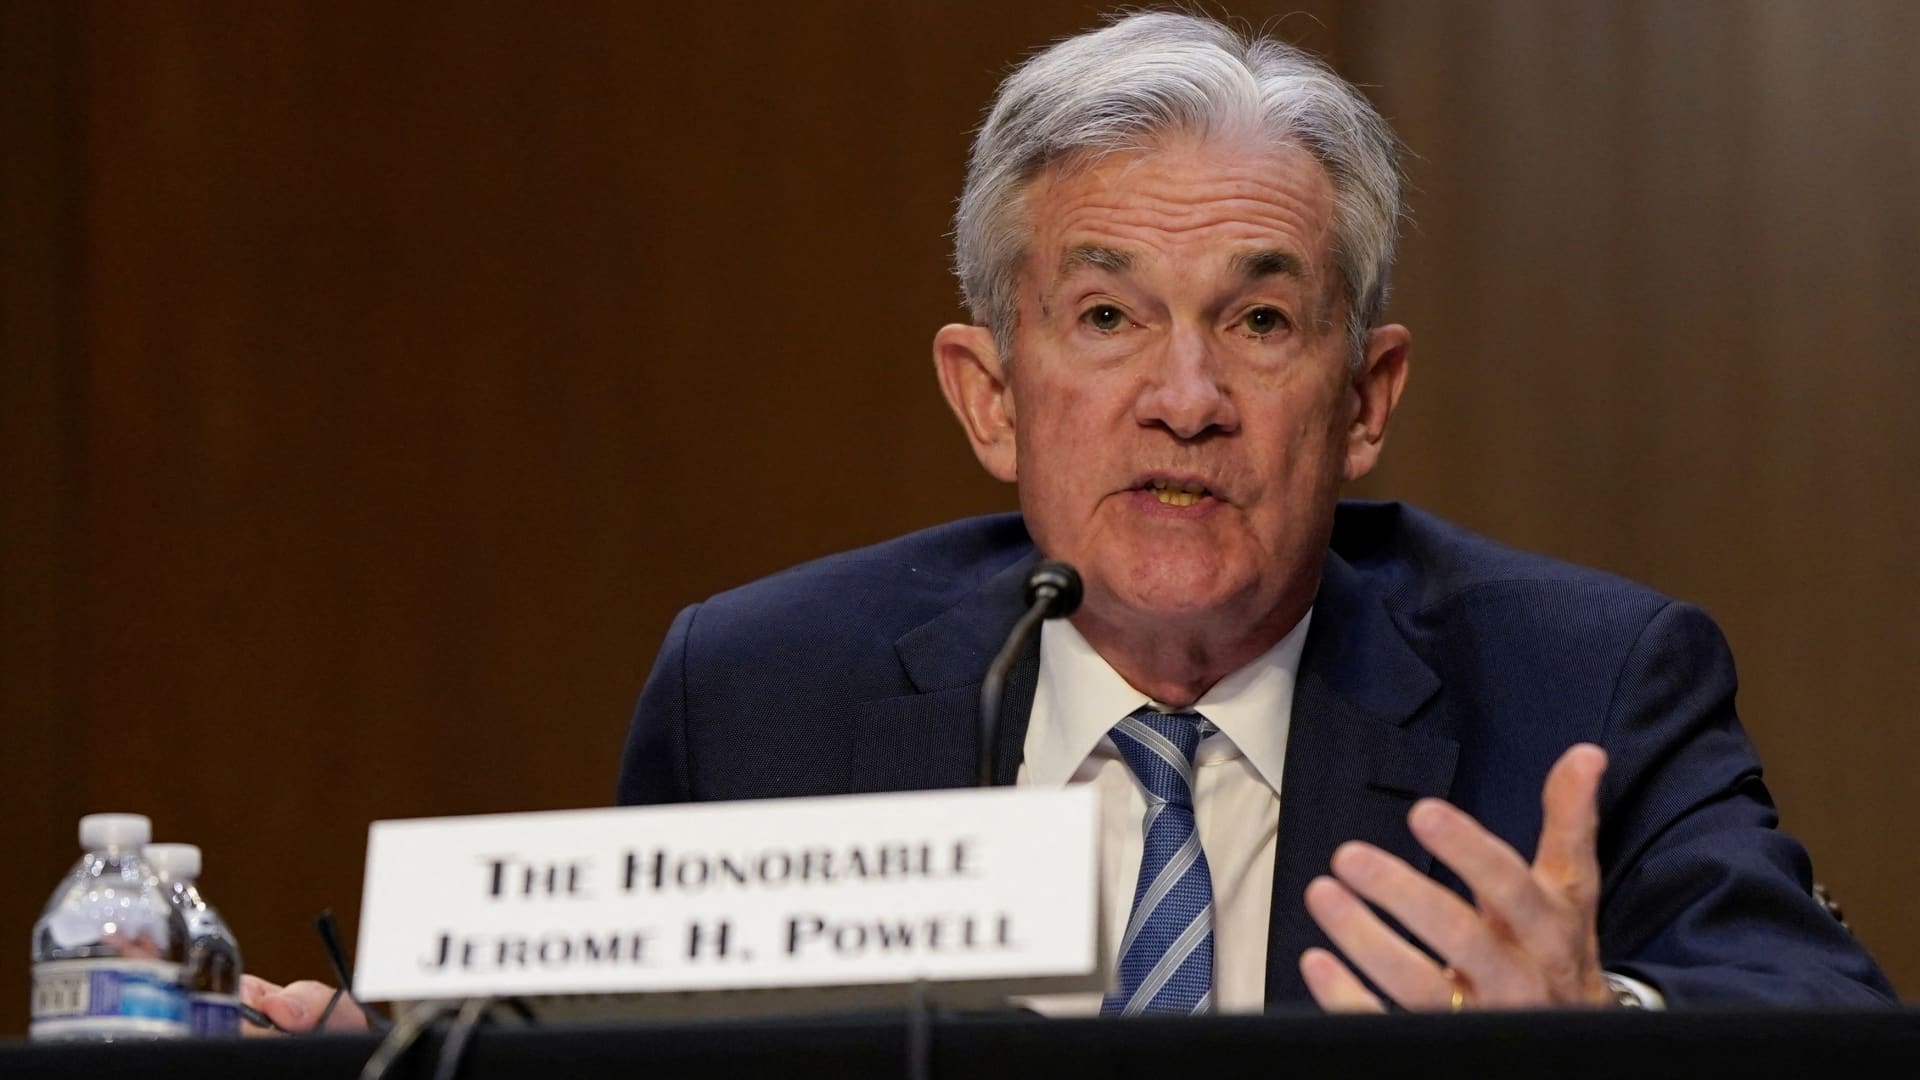 Watch Fed Chair Powell talk live about the economy, interest rates at ECB forum